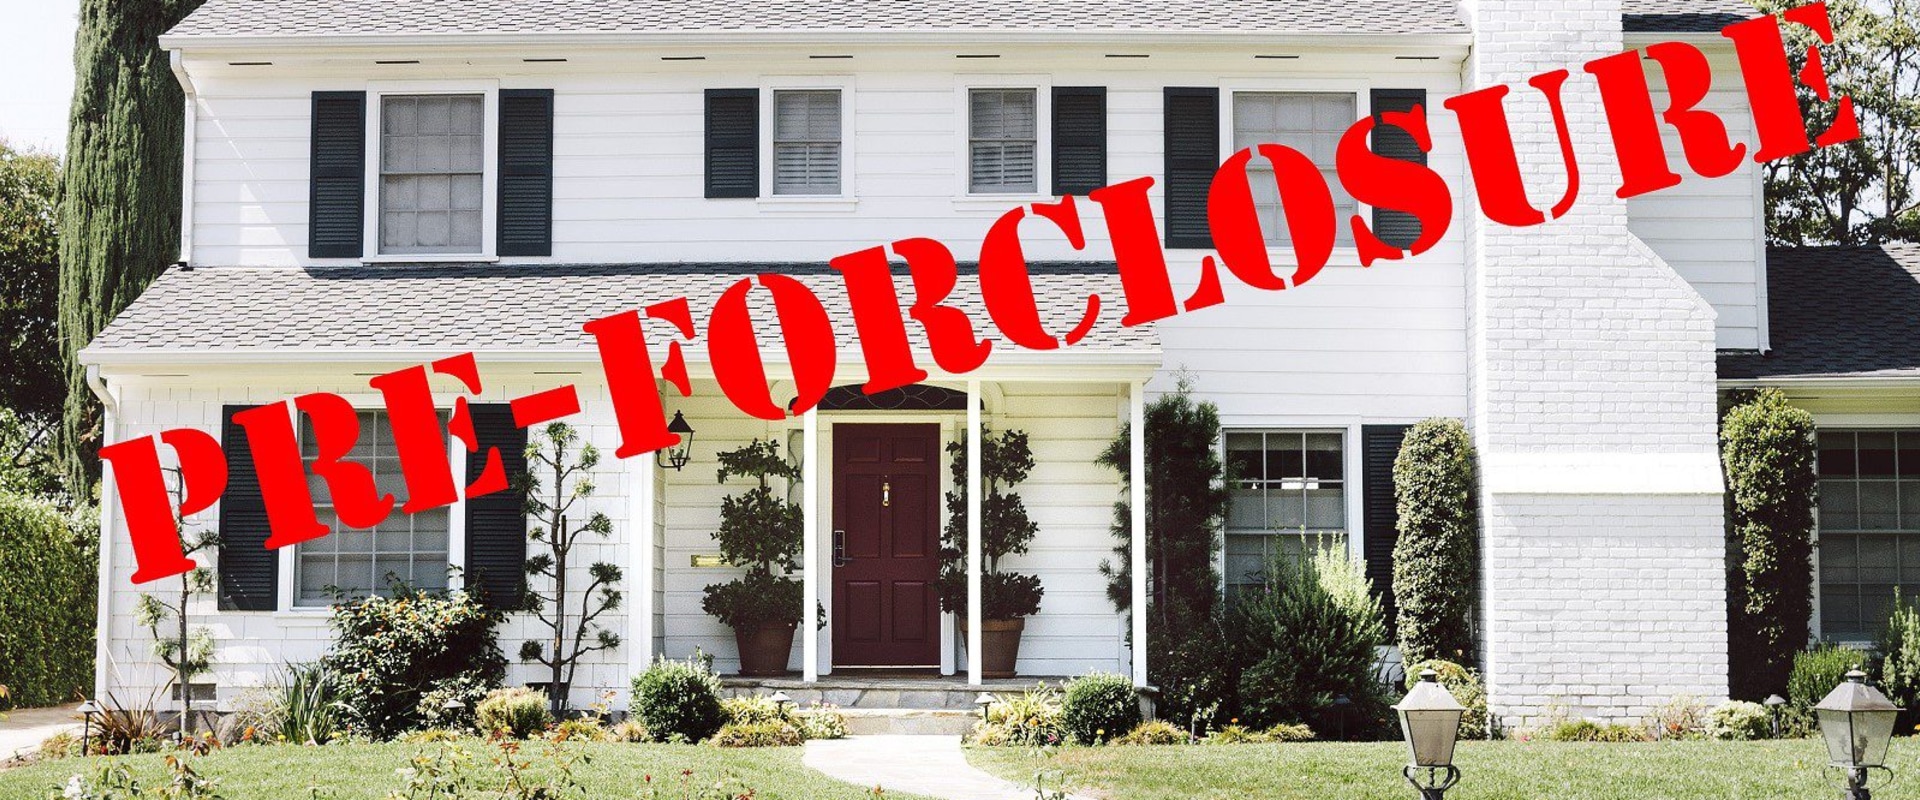 Marketing a Property After Investing in Foreclosures